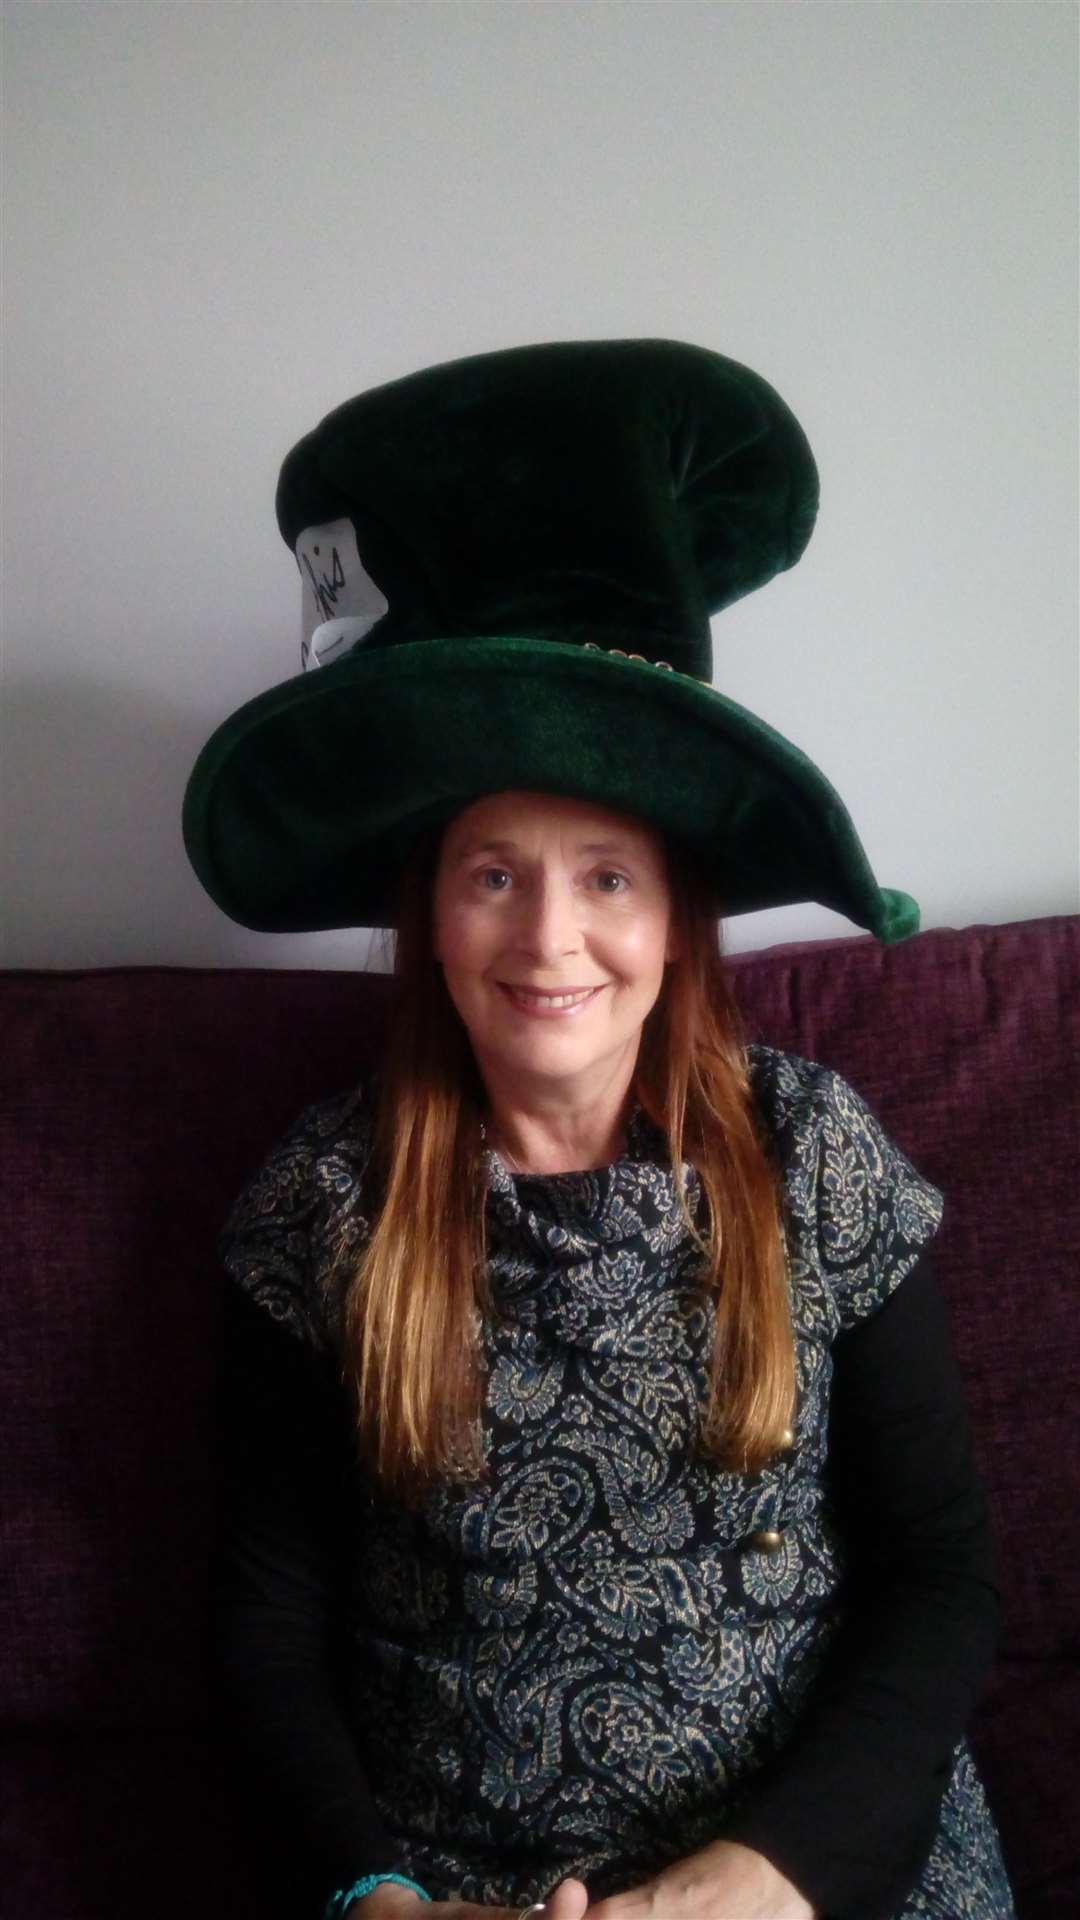 Claire Cordiner taking part in Wear A Hat Day to raise funds for Brain Tumour Research (Claire Cordiner/PA)